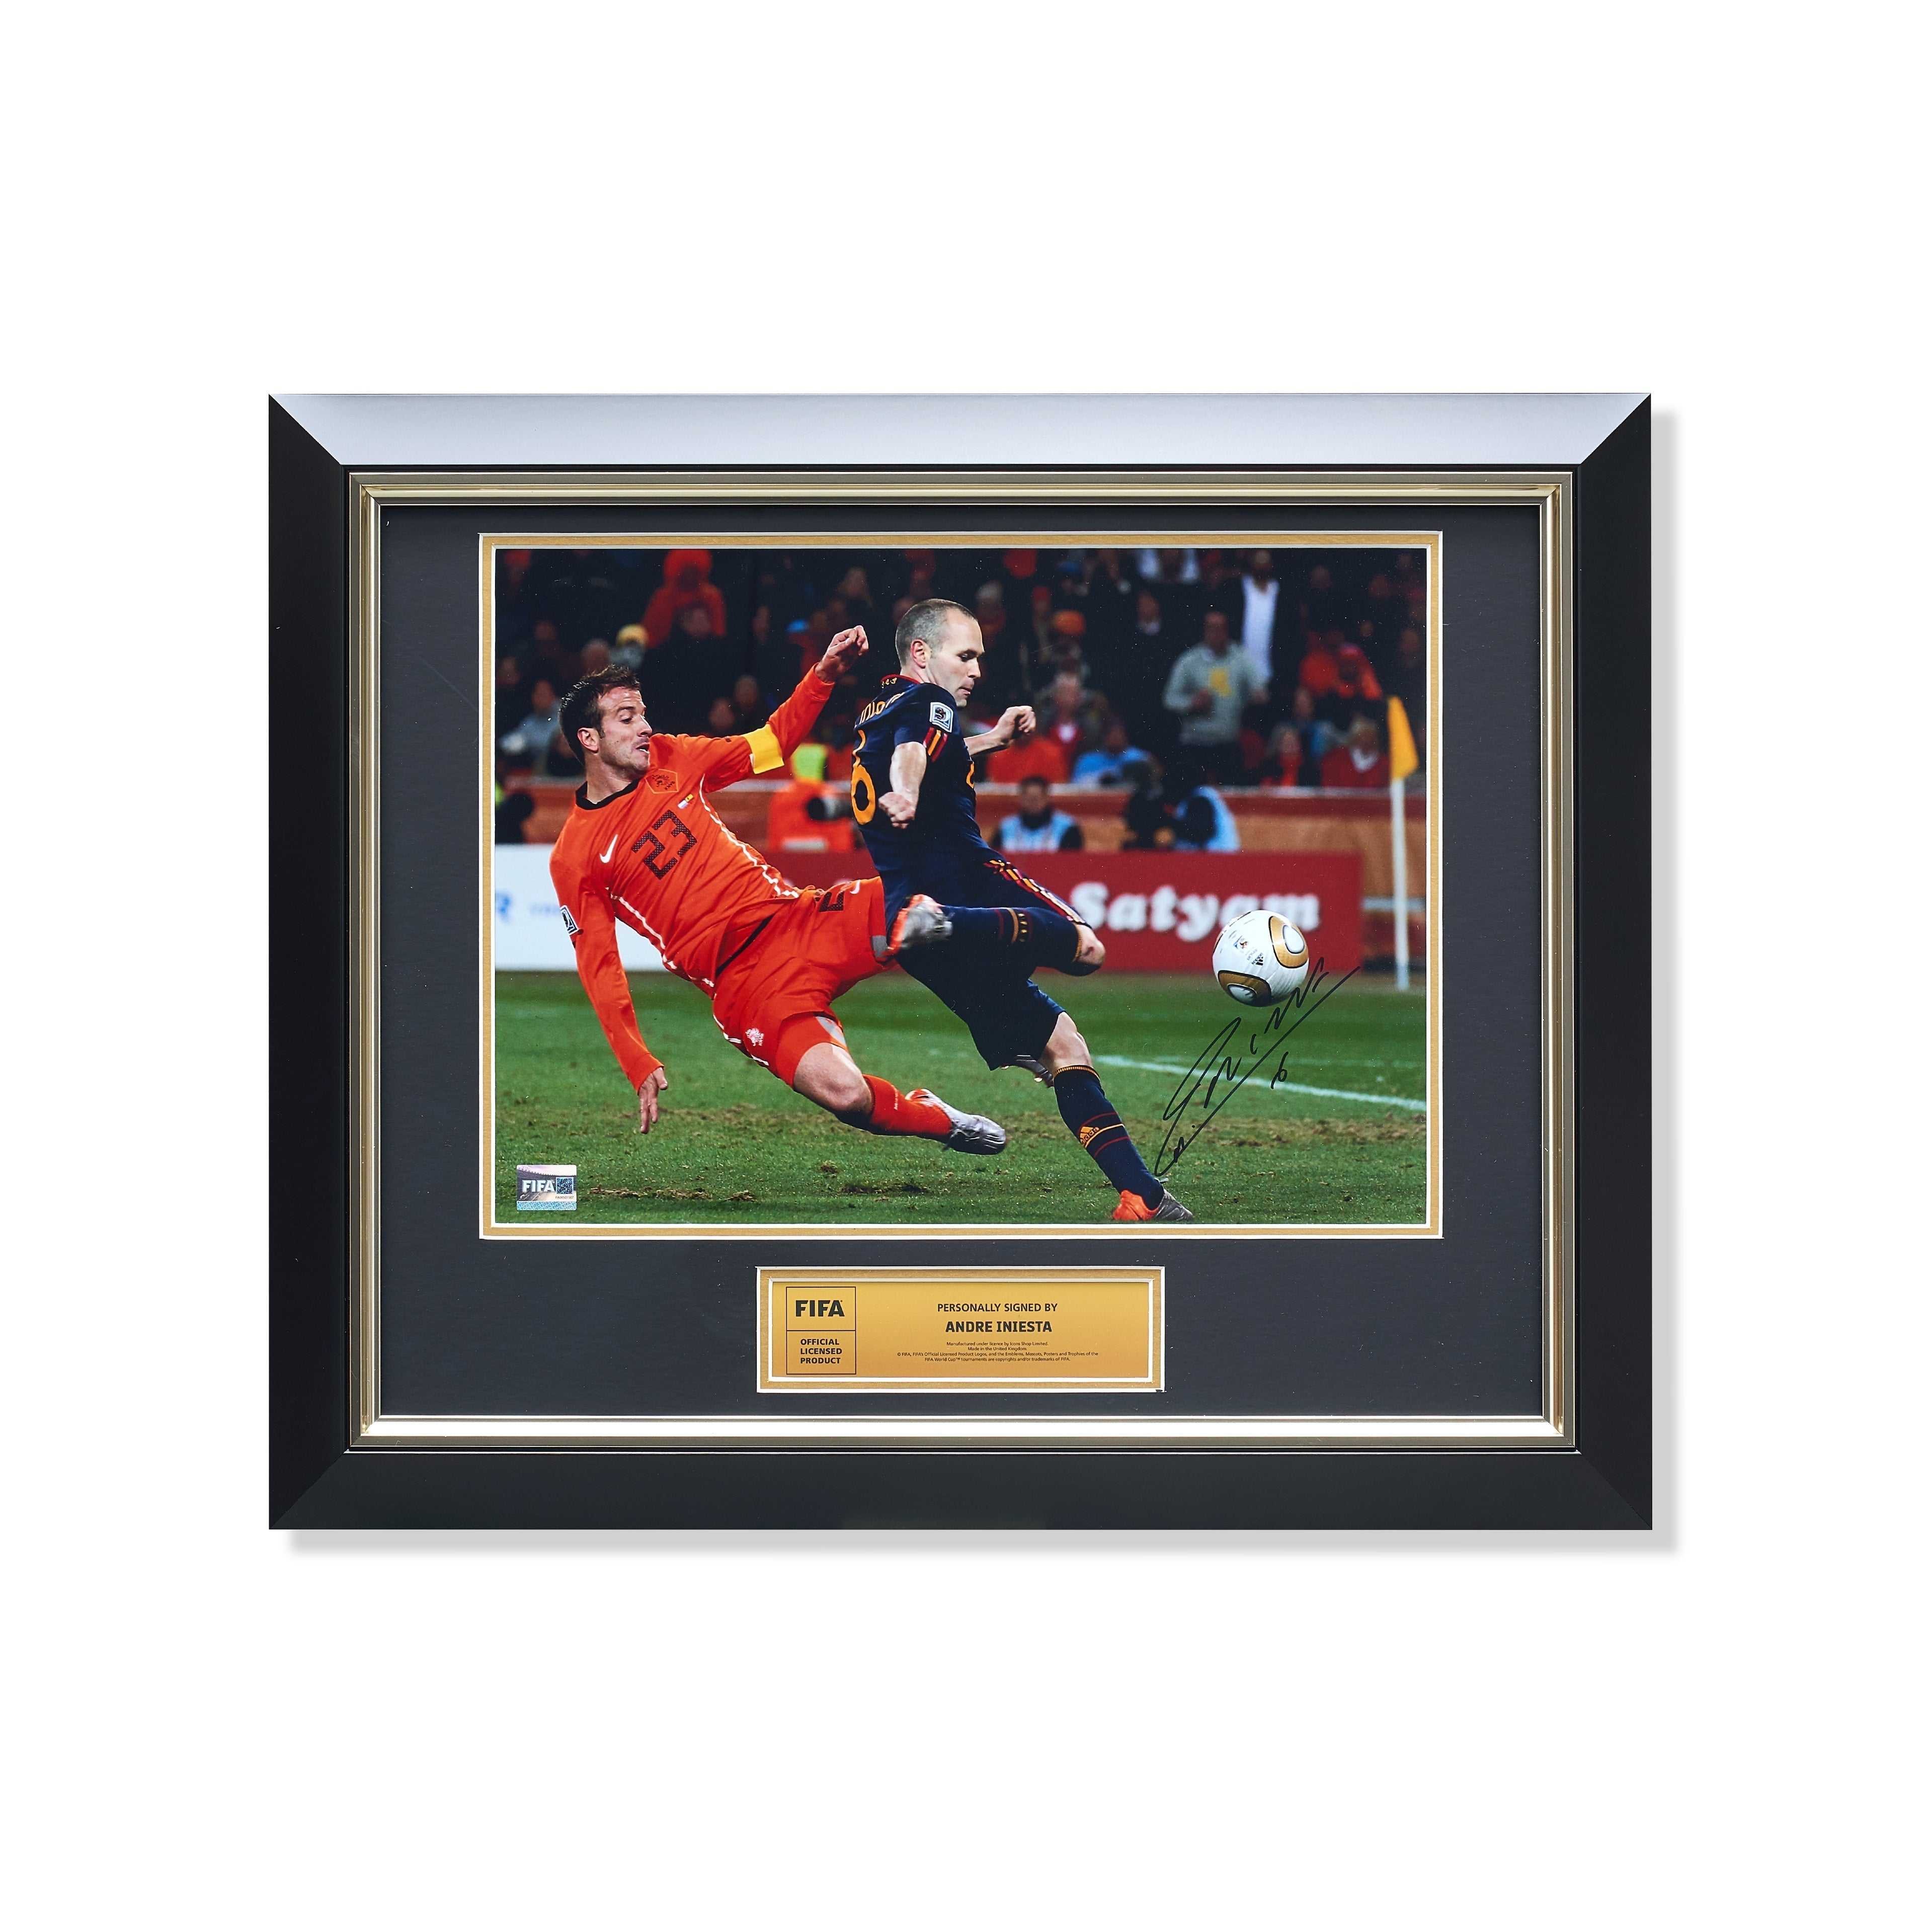 Andres Iniesta Official Signed And Framed Photo: Iconic 2010 FIFA World Cup Final Goal